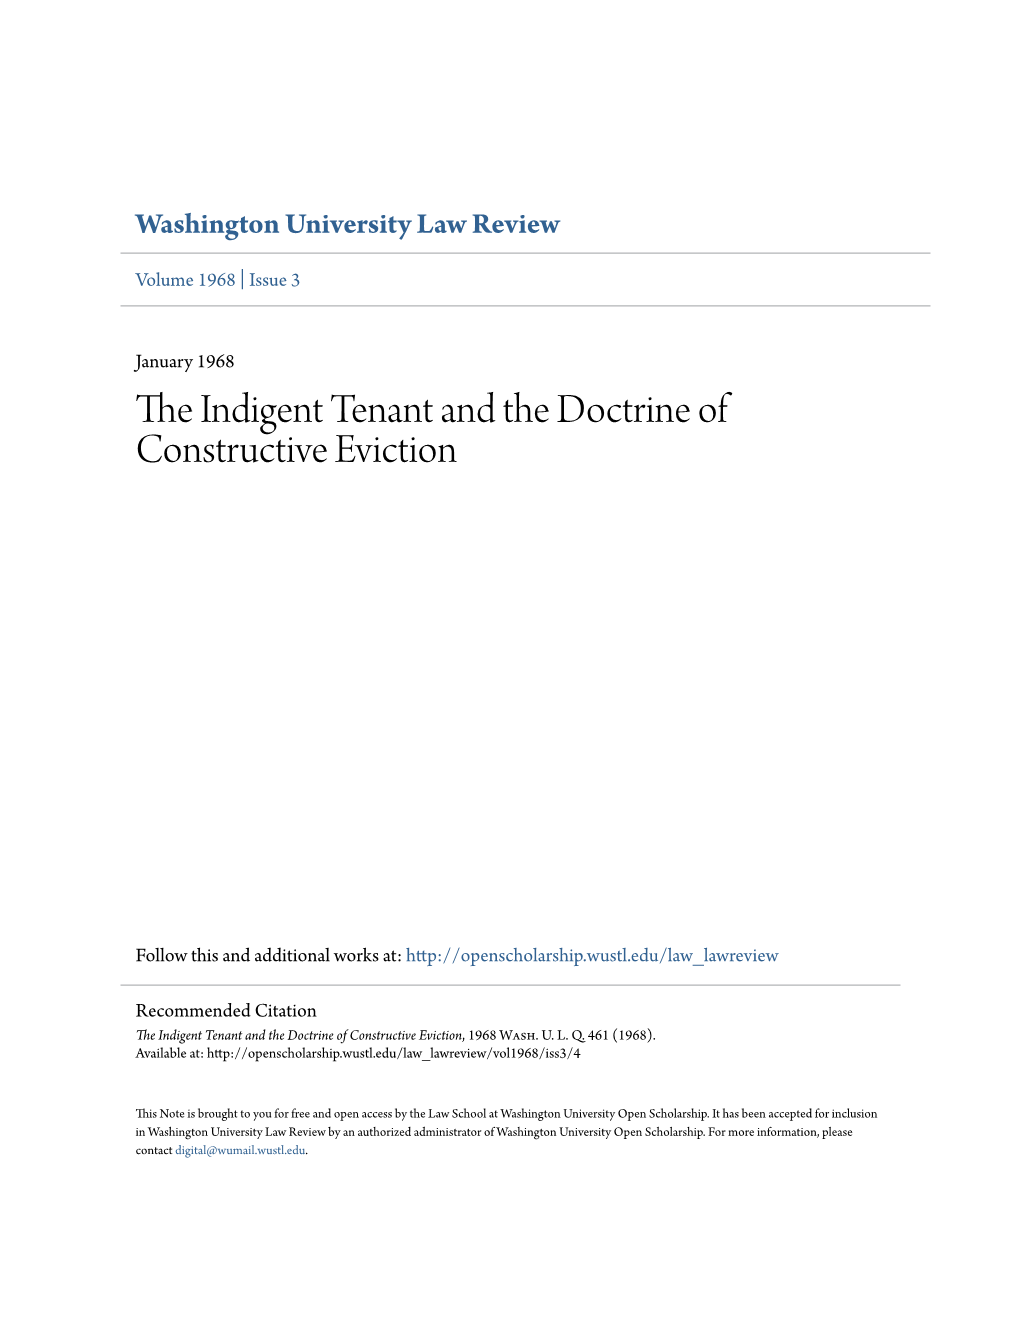 The Indigent Tenant and the Doctrine of Constructive Eviction, 1968 Wash